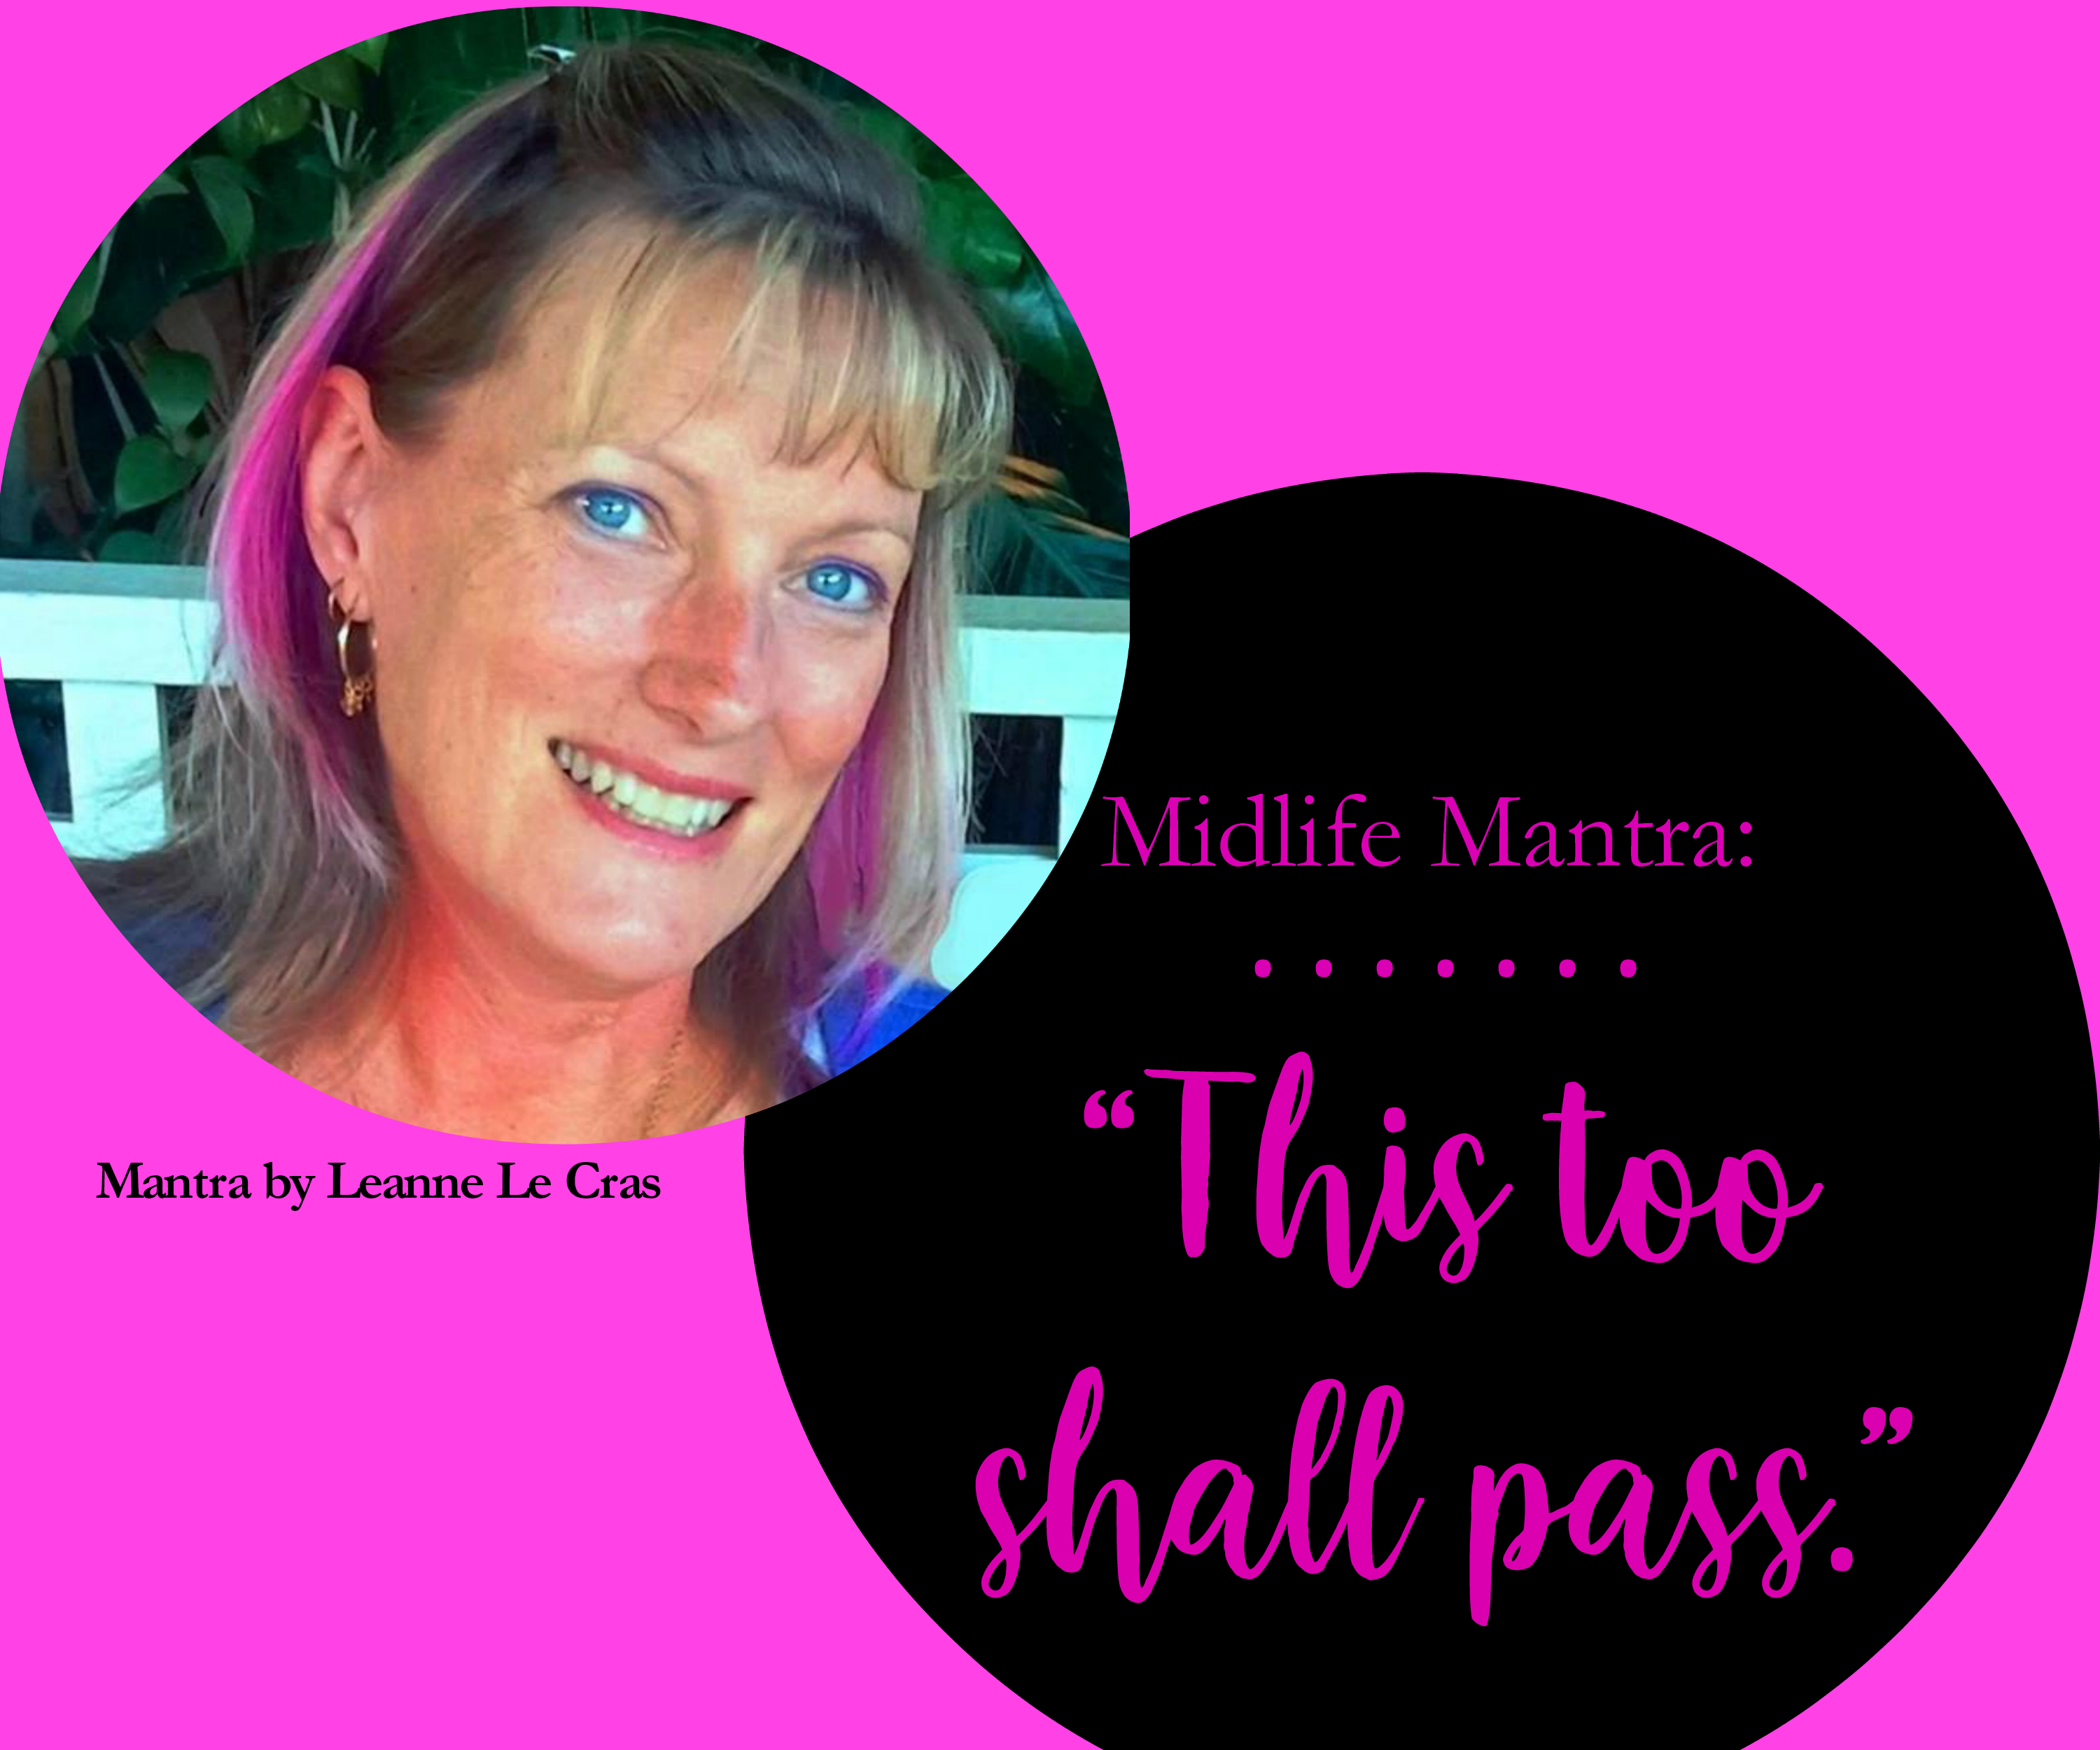 Midlife Mantra: This Too Shall Pass